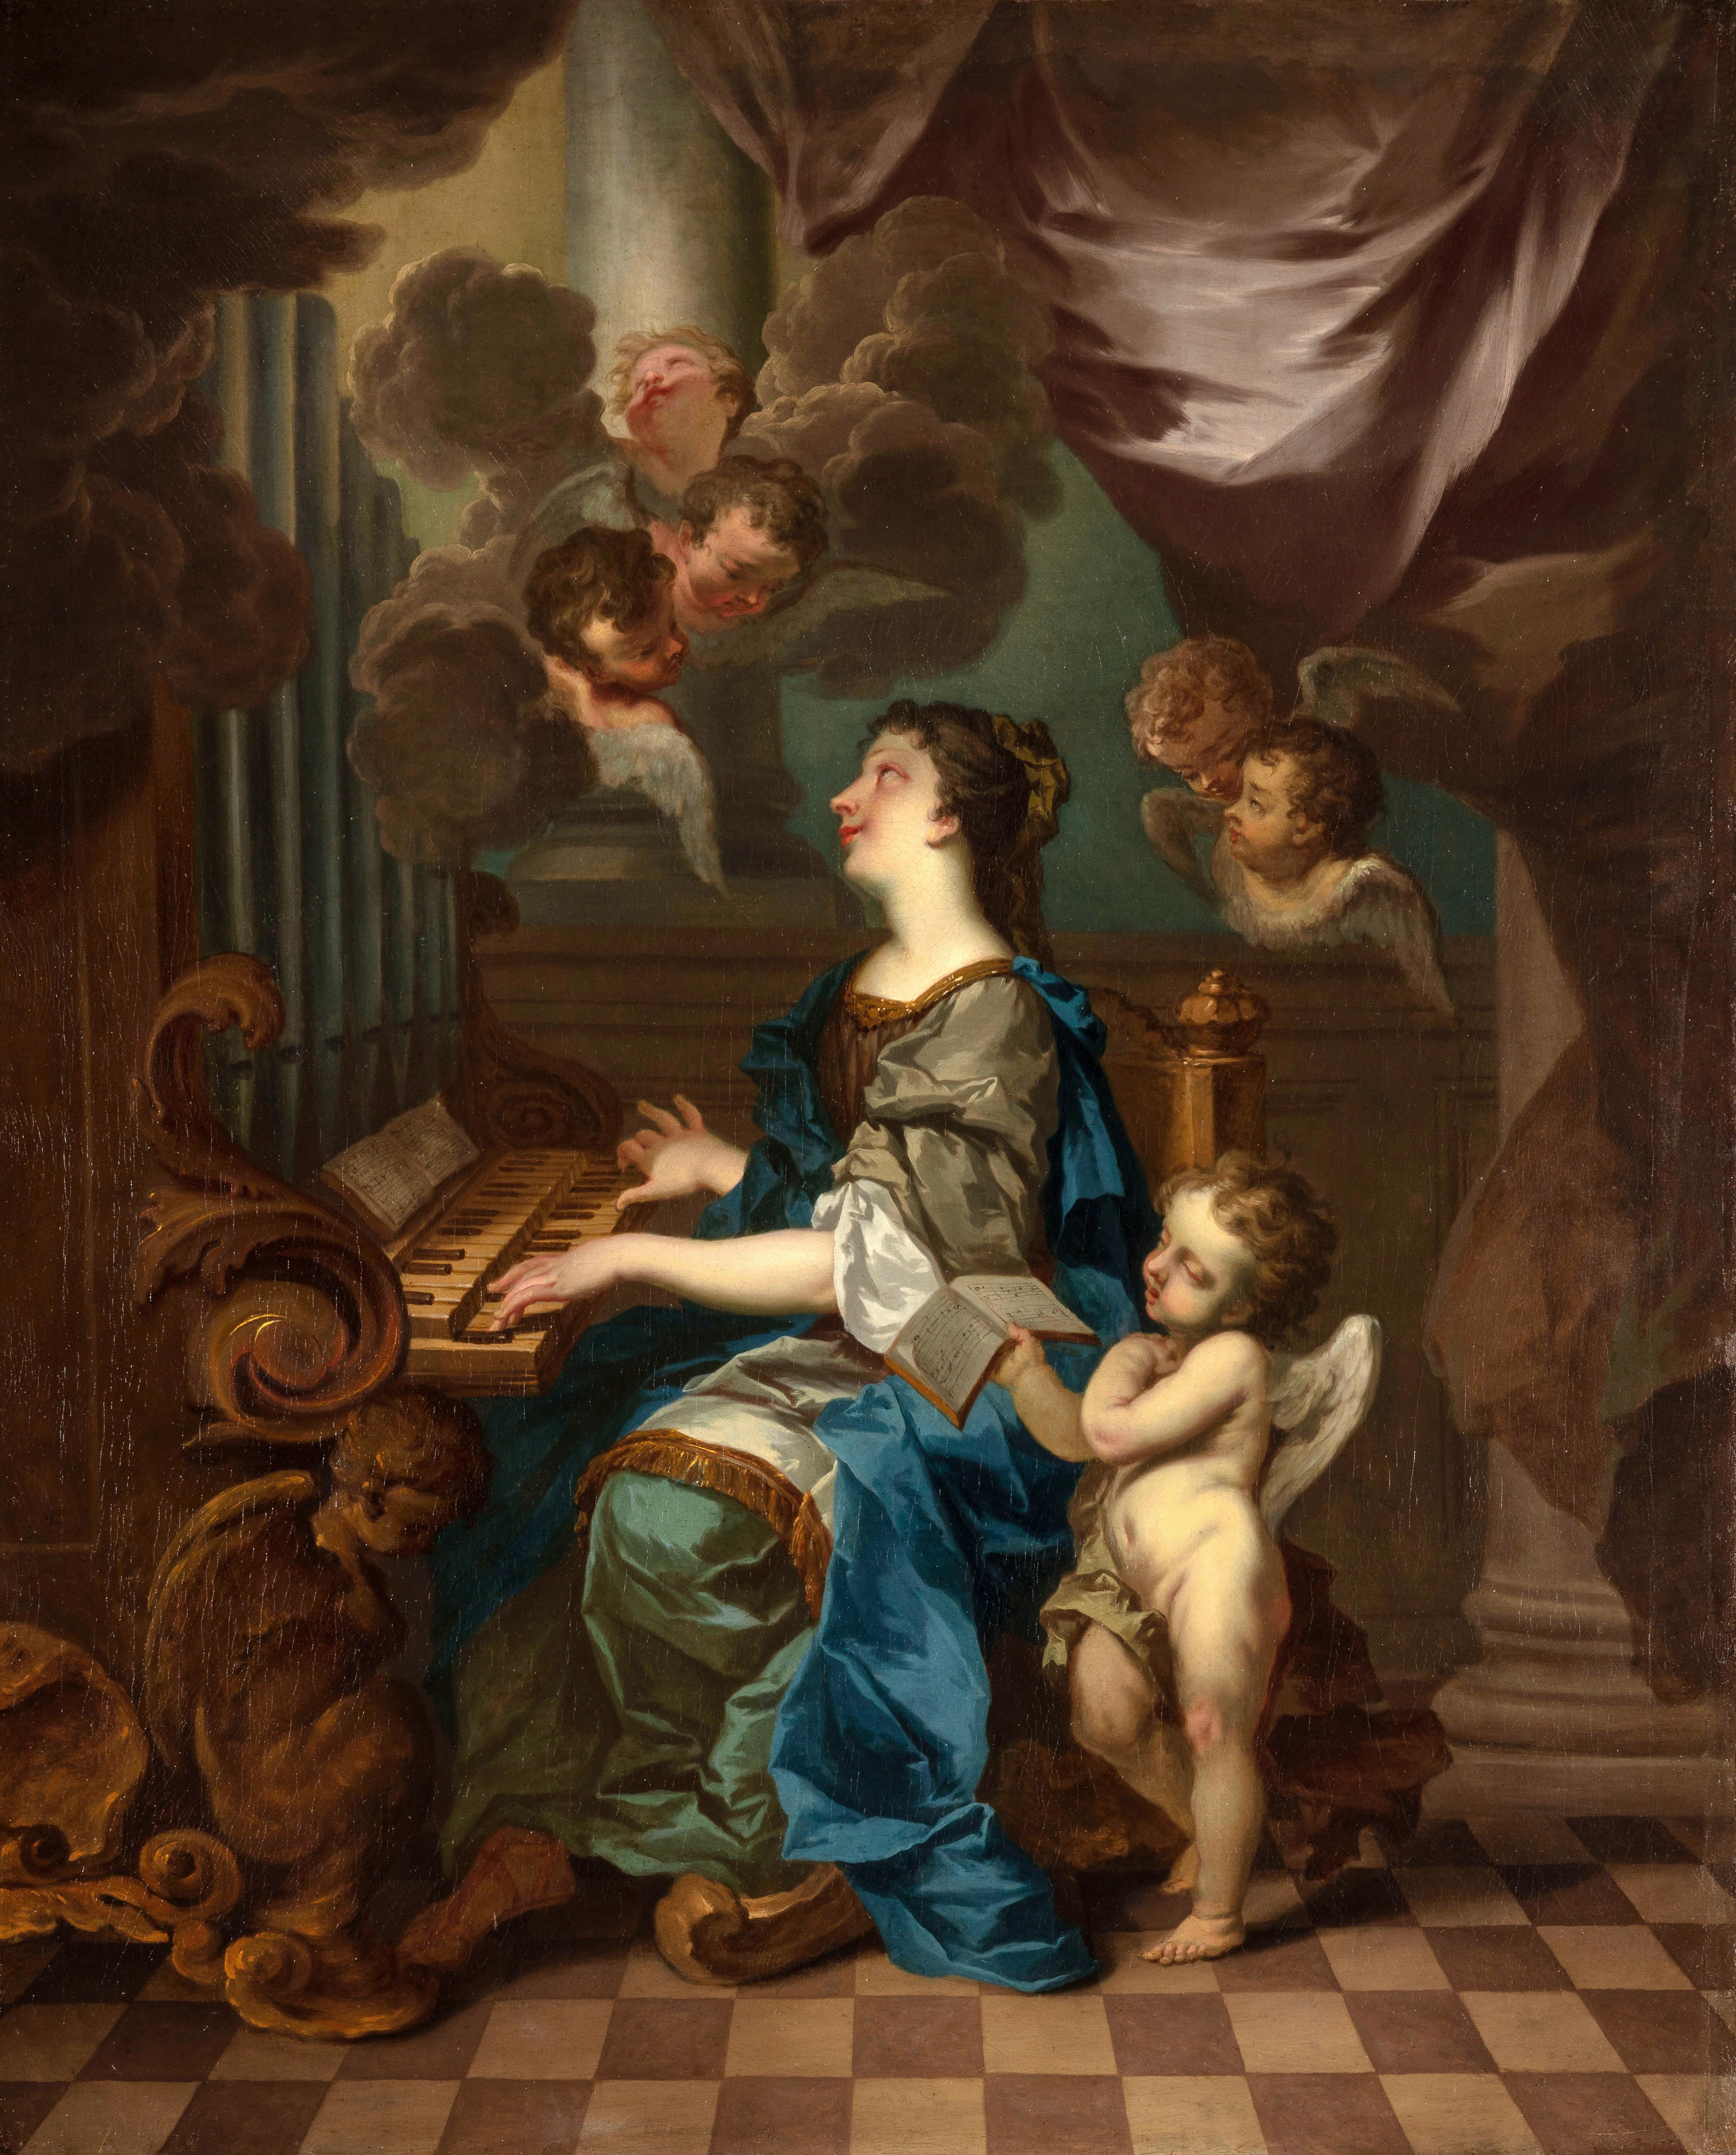 17th century Roman school, Santa Cecilia with angels in concert, oil painting on canvas

The valuable painting, in excellent condition, depicts Saint Cecilia playing the organ, surrounded by cherubs and cherubim. The saint, with an absent gaze and